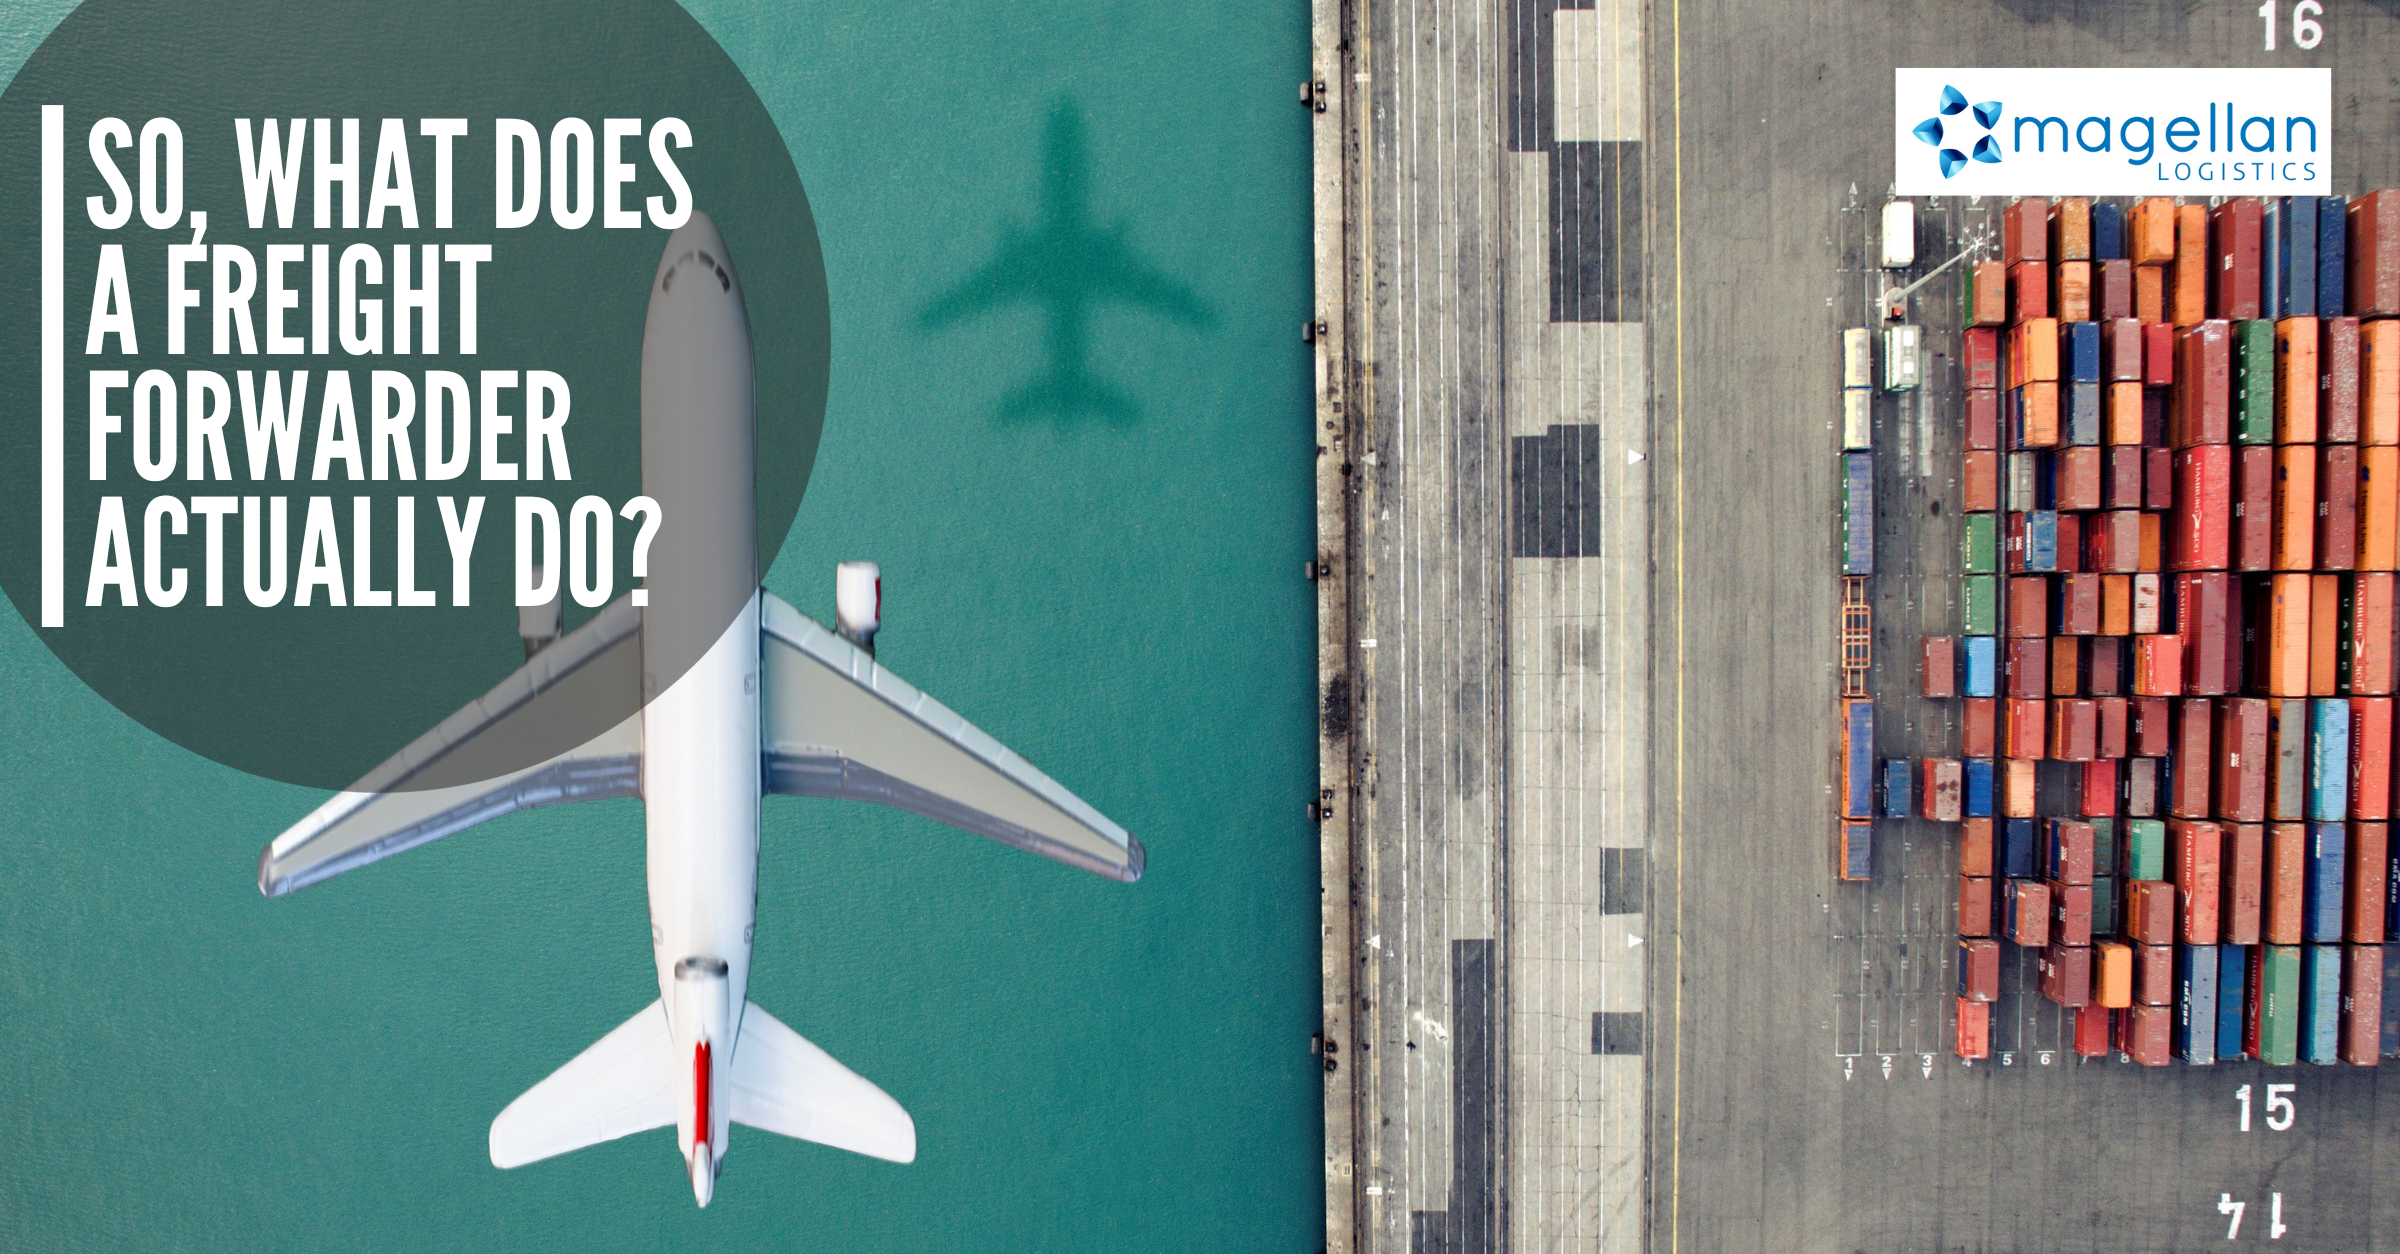 So, what does a freight forwarder actually do?